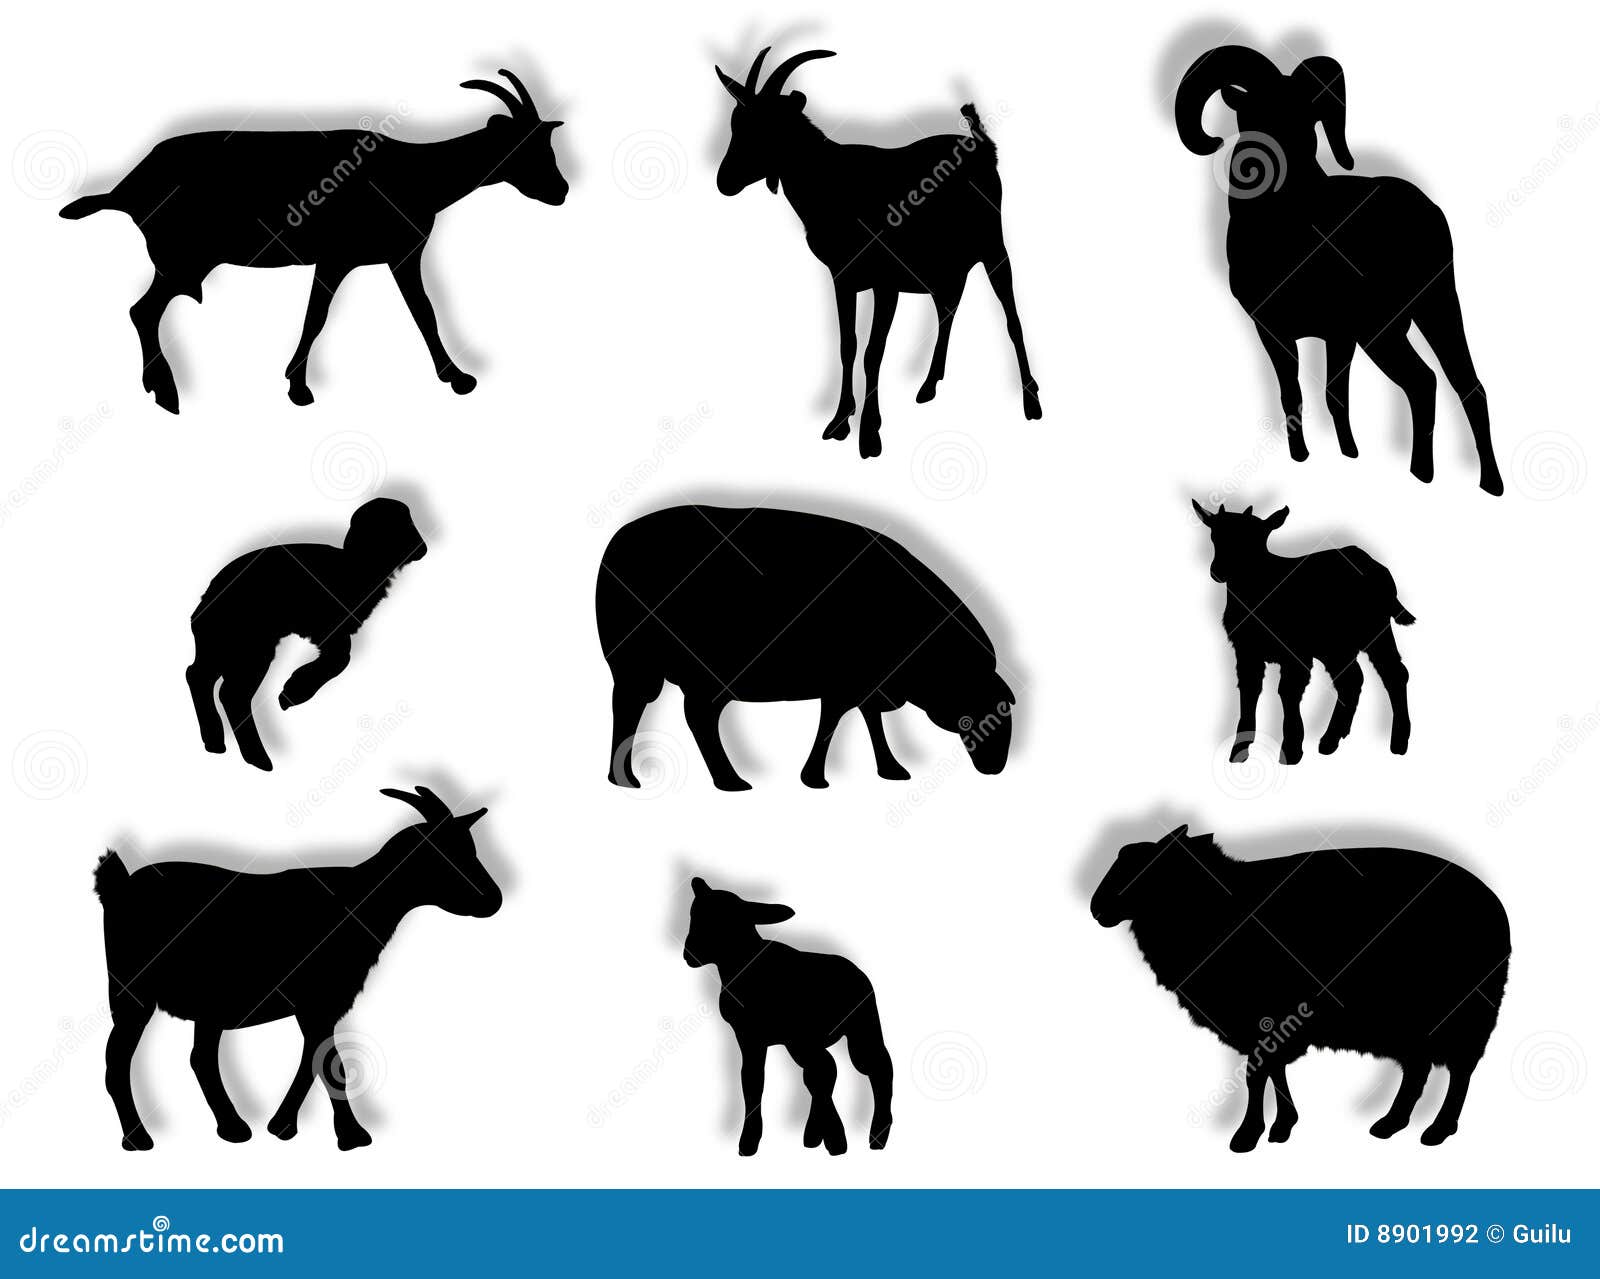 sheep and goats in silhouette